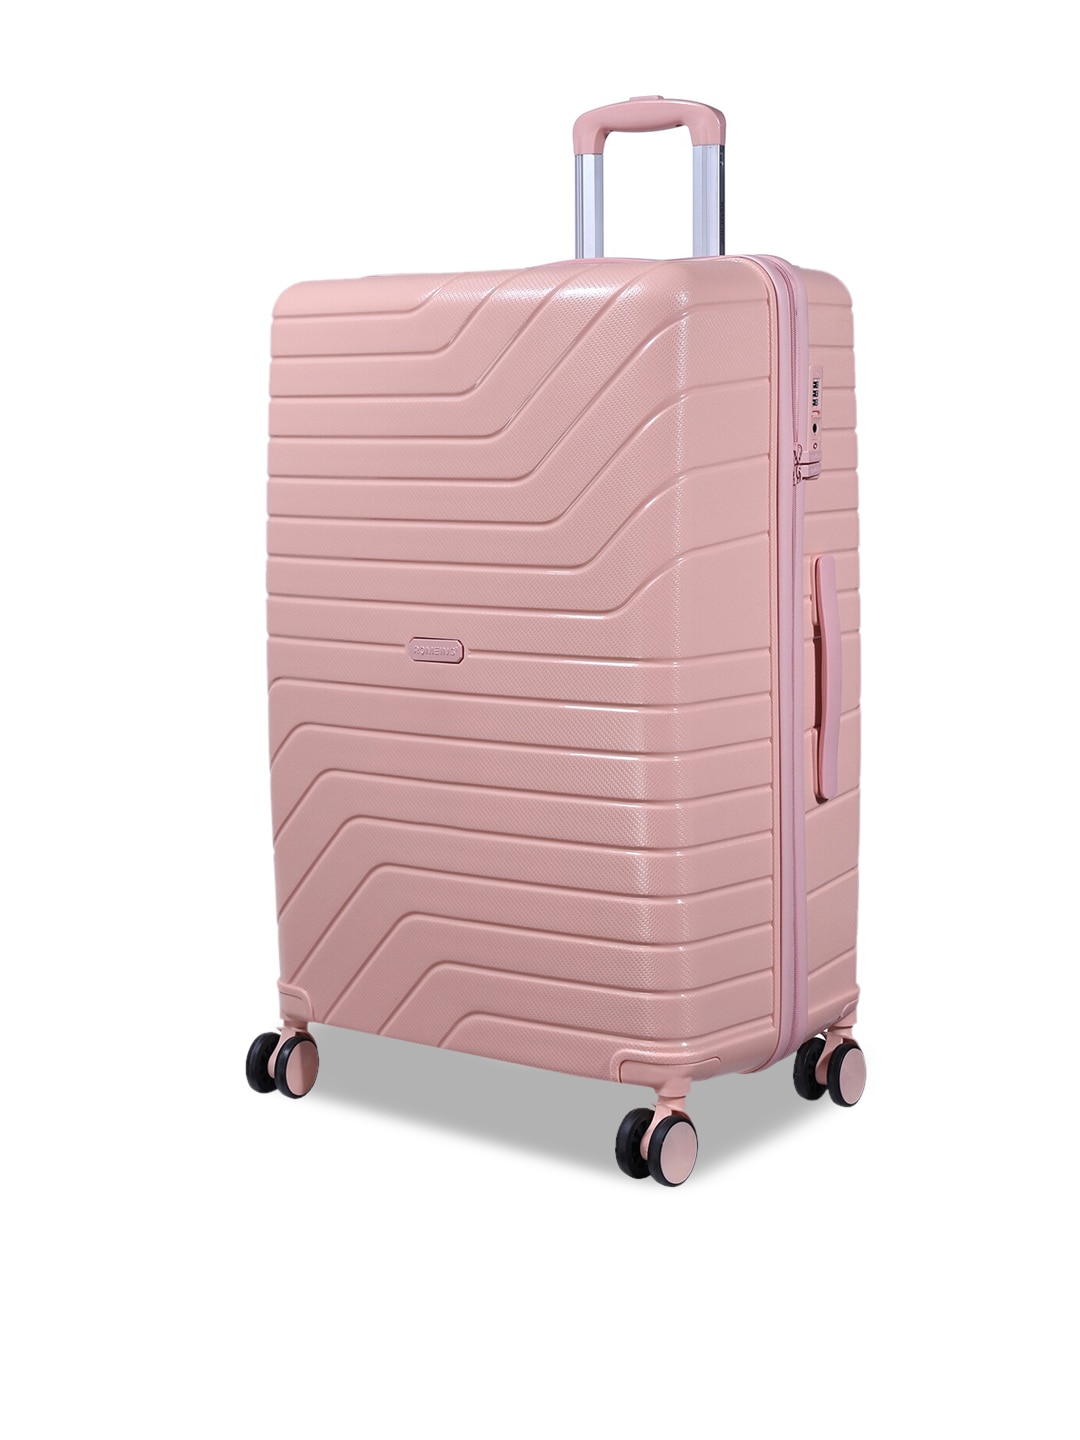 ROMEING Tuscany Pink Textured Hard Large Polypropylene Trolley Suitcase Price in India